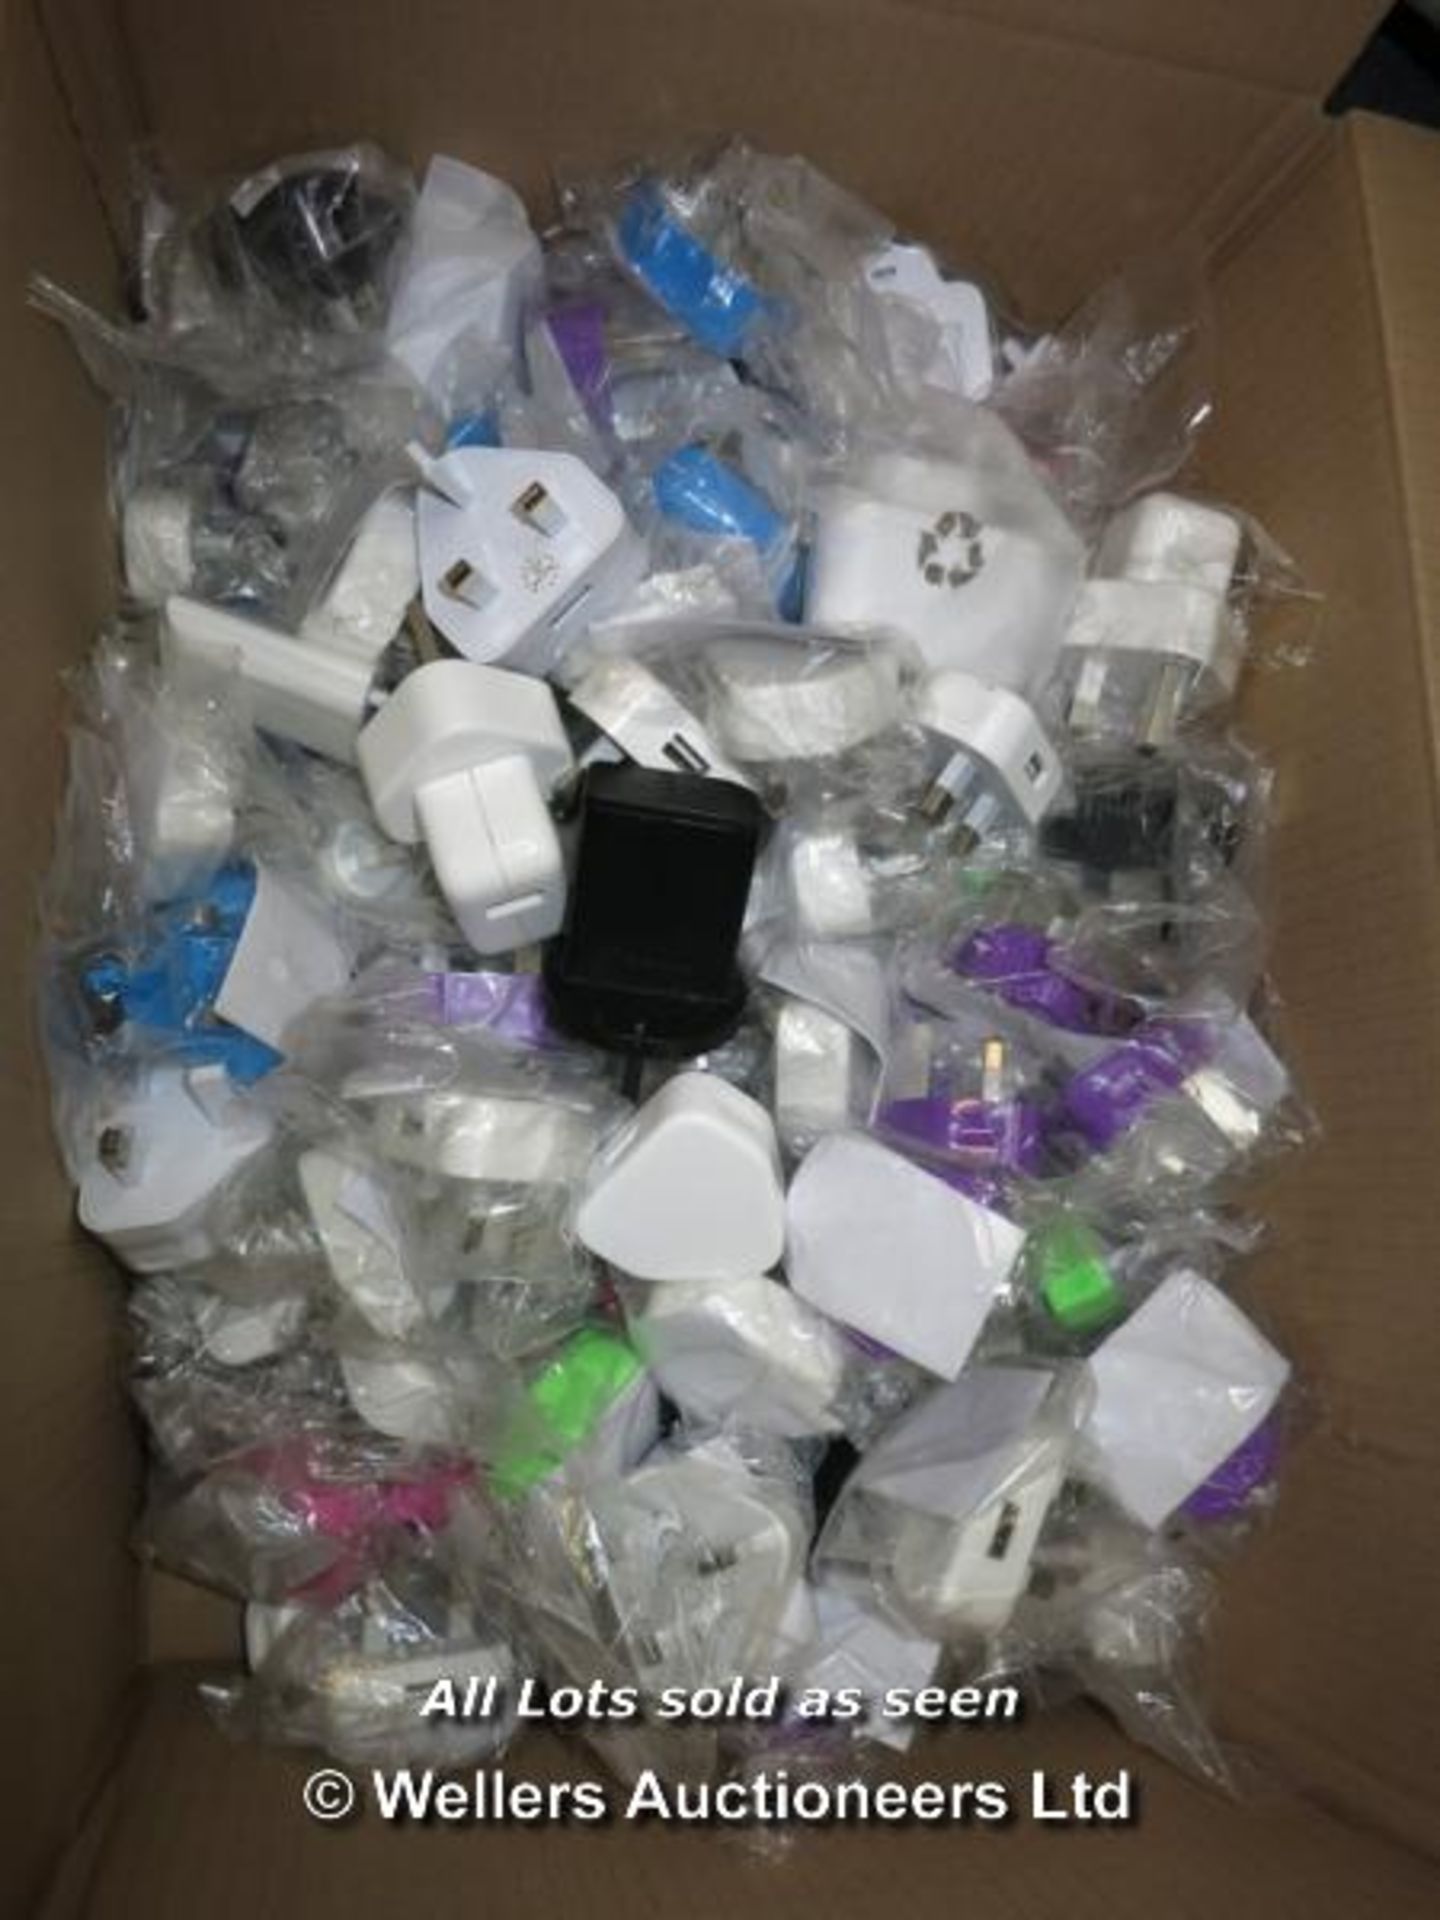 150X MAINS USB PLUGS (LOOSE) / GRADE: UNCLAIMED PROPERTY / UNBOXED (DC2){YT00551521GB[MK290715]